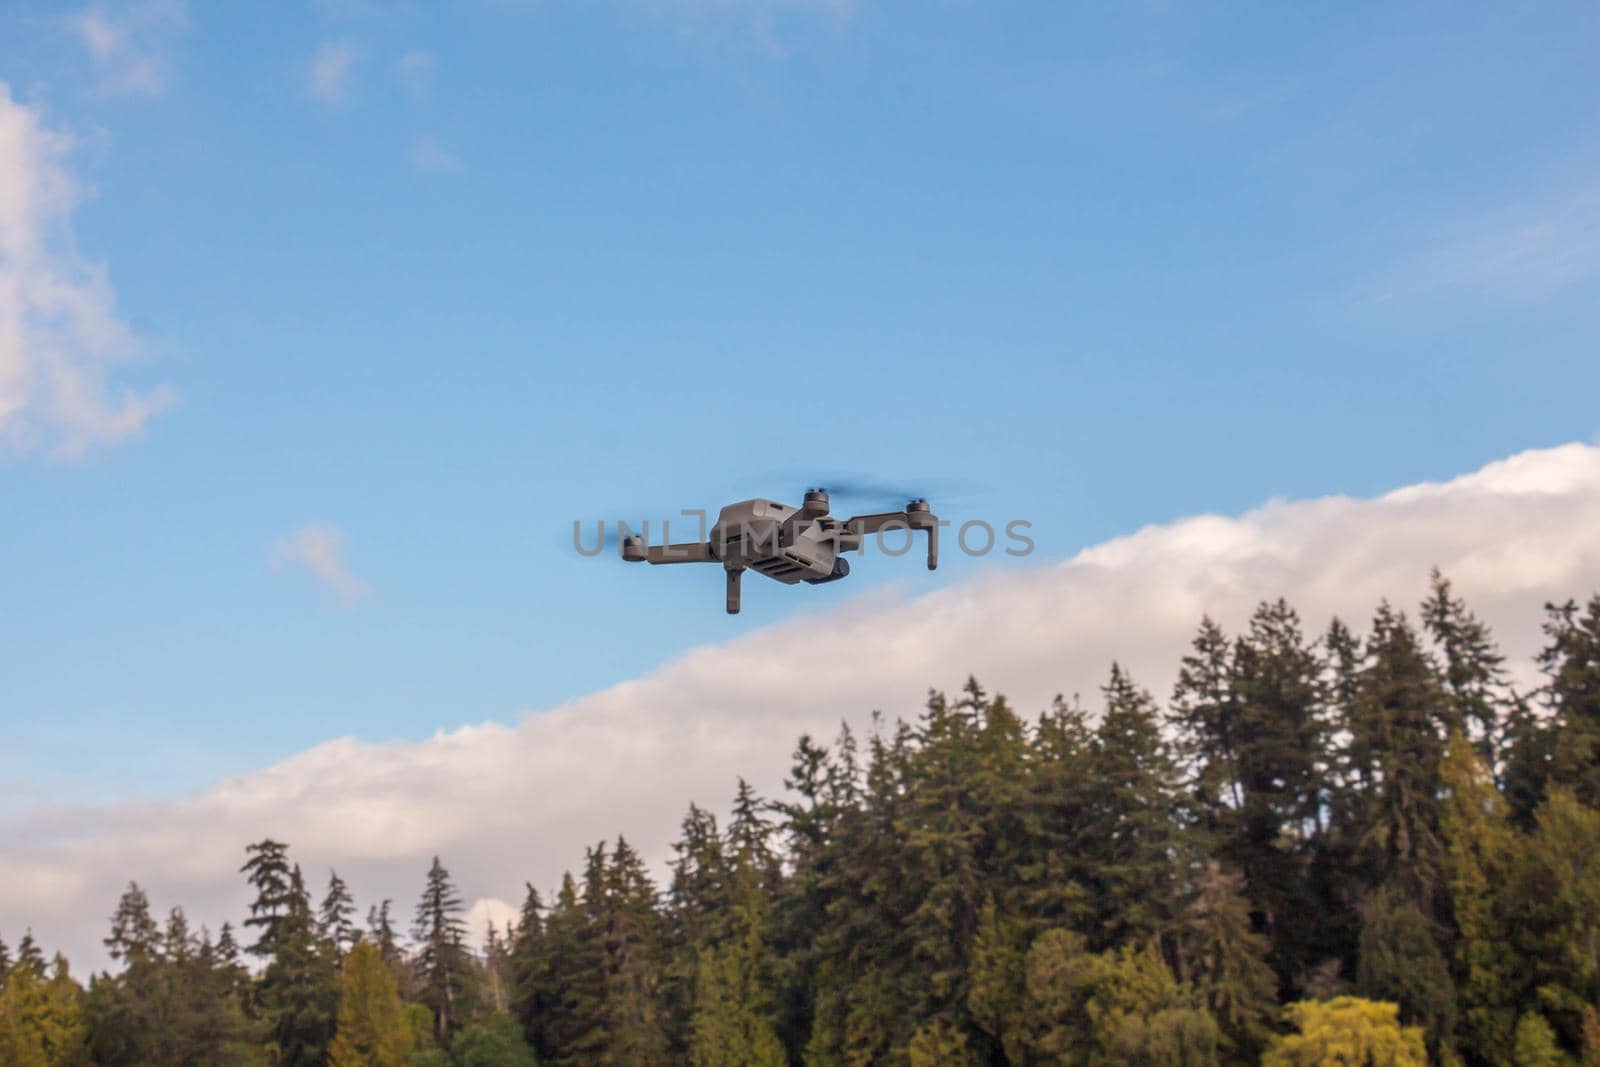 Vancouver, BC Canada - September 2, 2020: Small drone flying over the green forest in suburban area by JuliaDorian